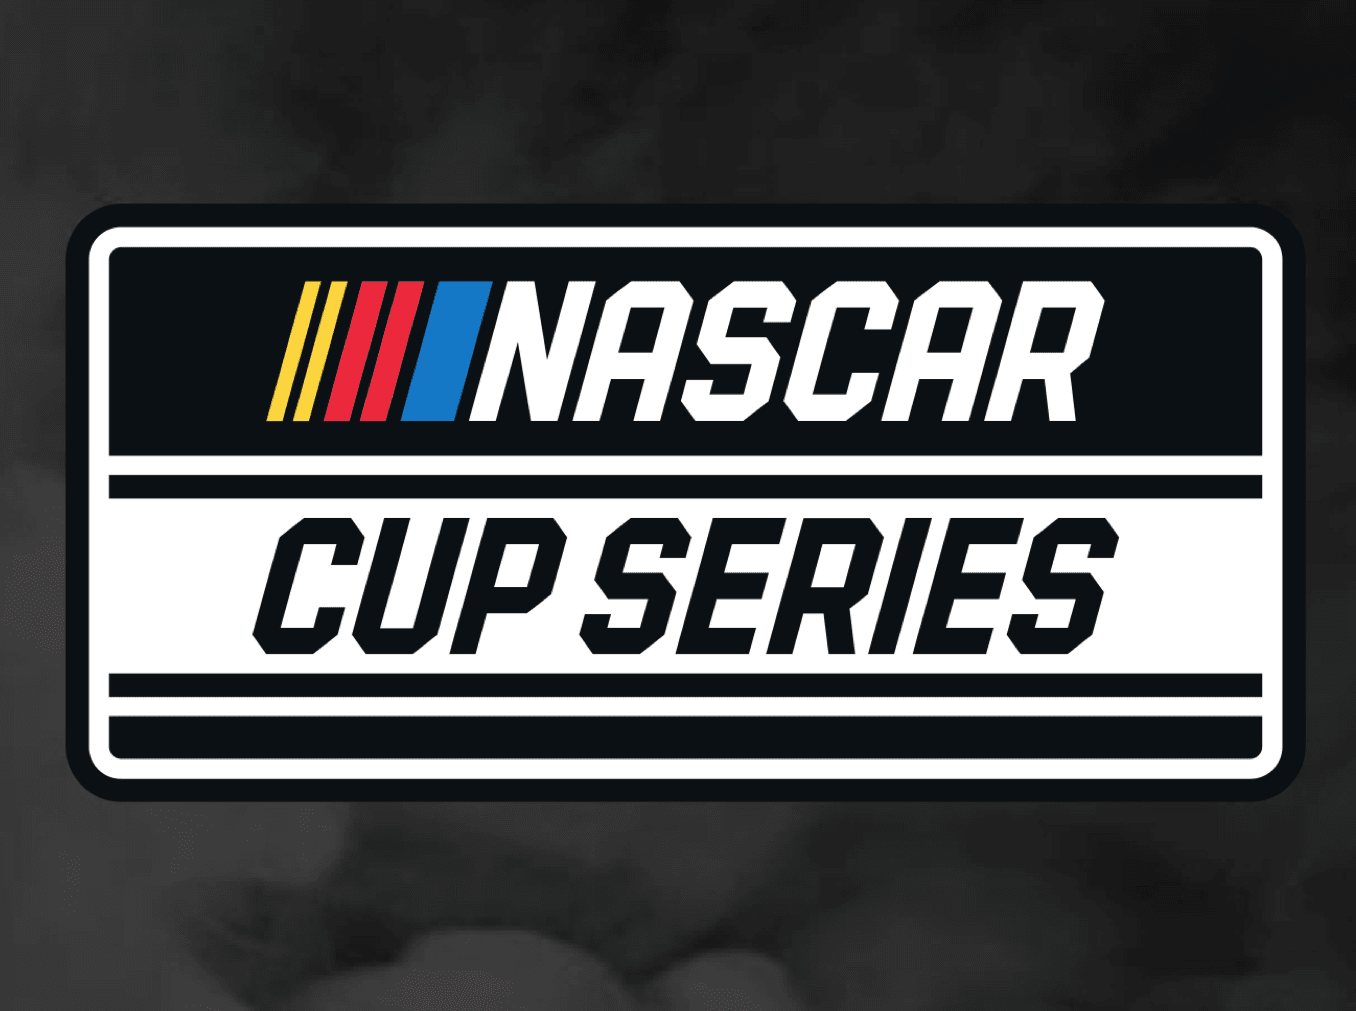 Cup Series